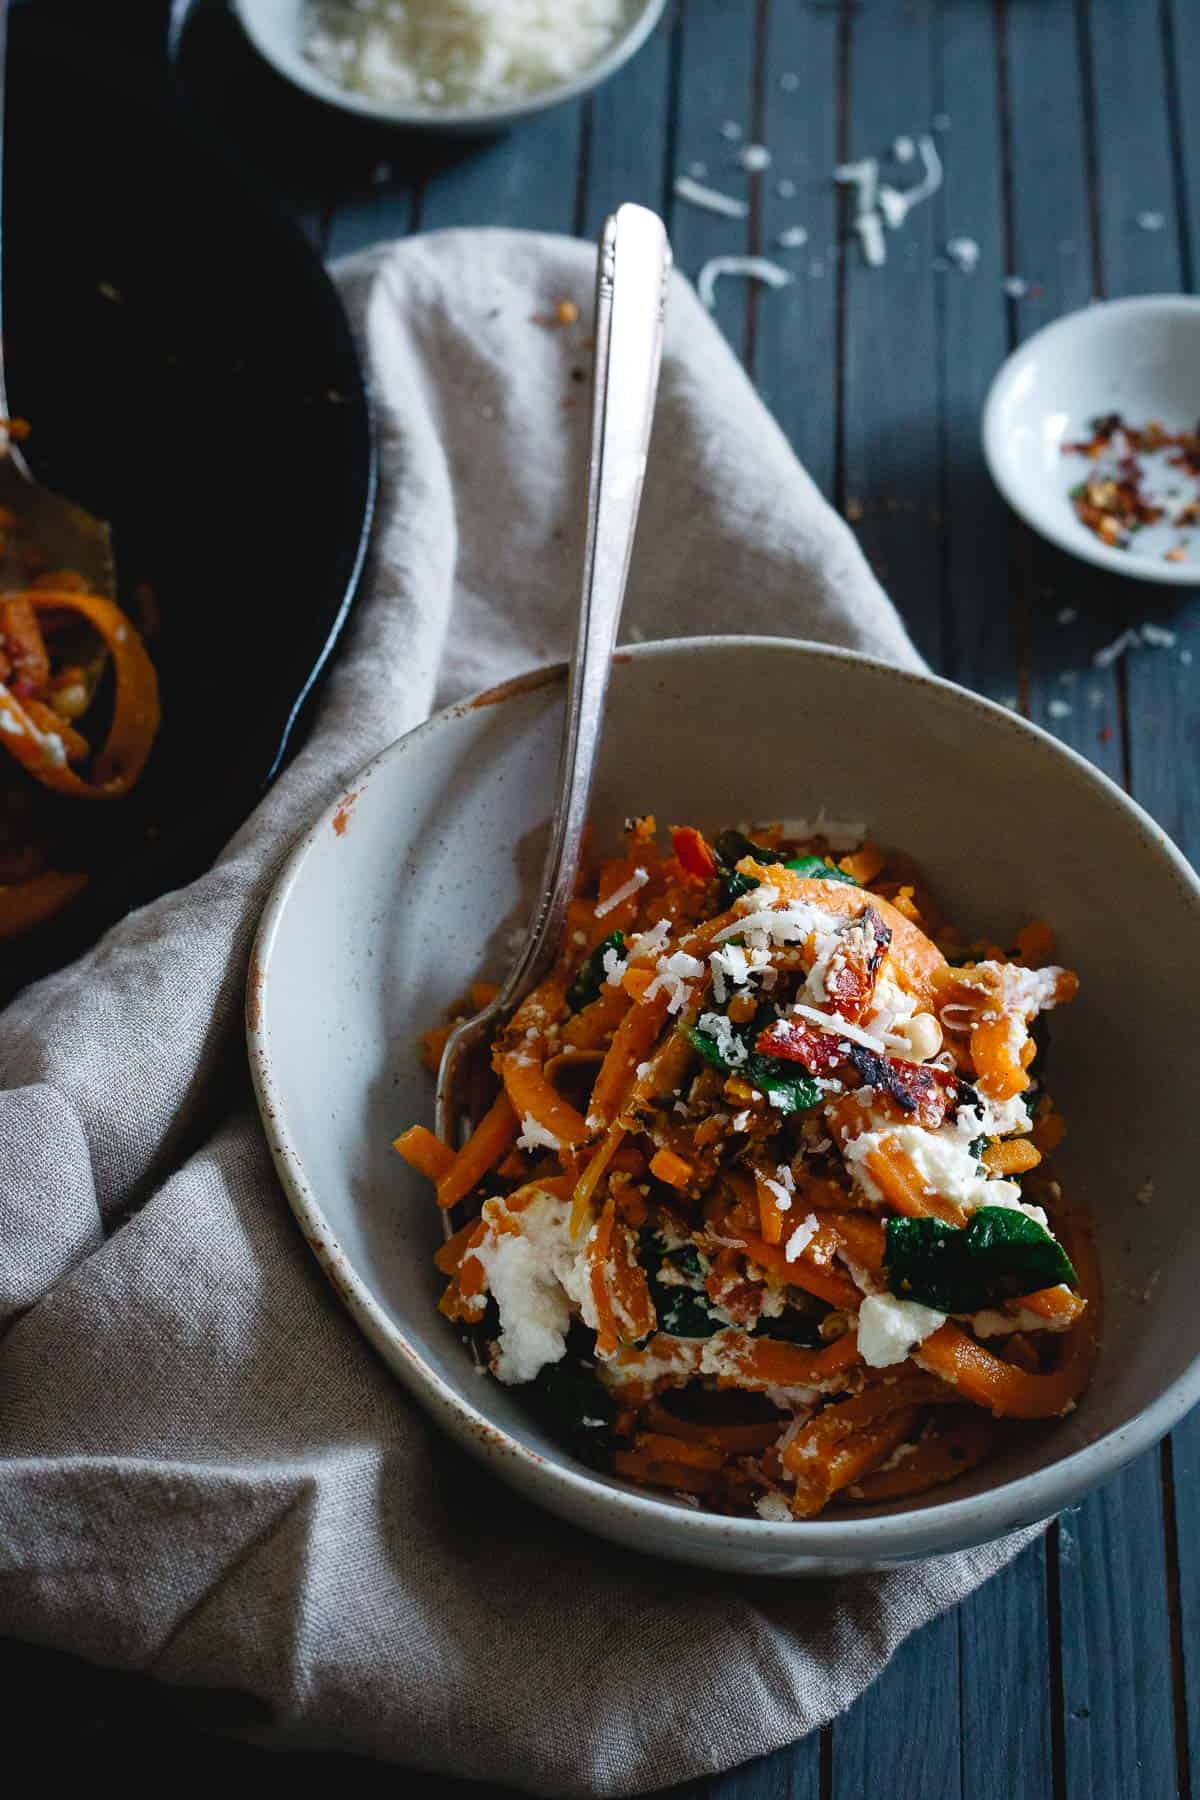 Garlicky butternut squash noodles make a simple, cozy vegetarian, one-skillet meal packed with winter flavors.